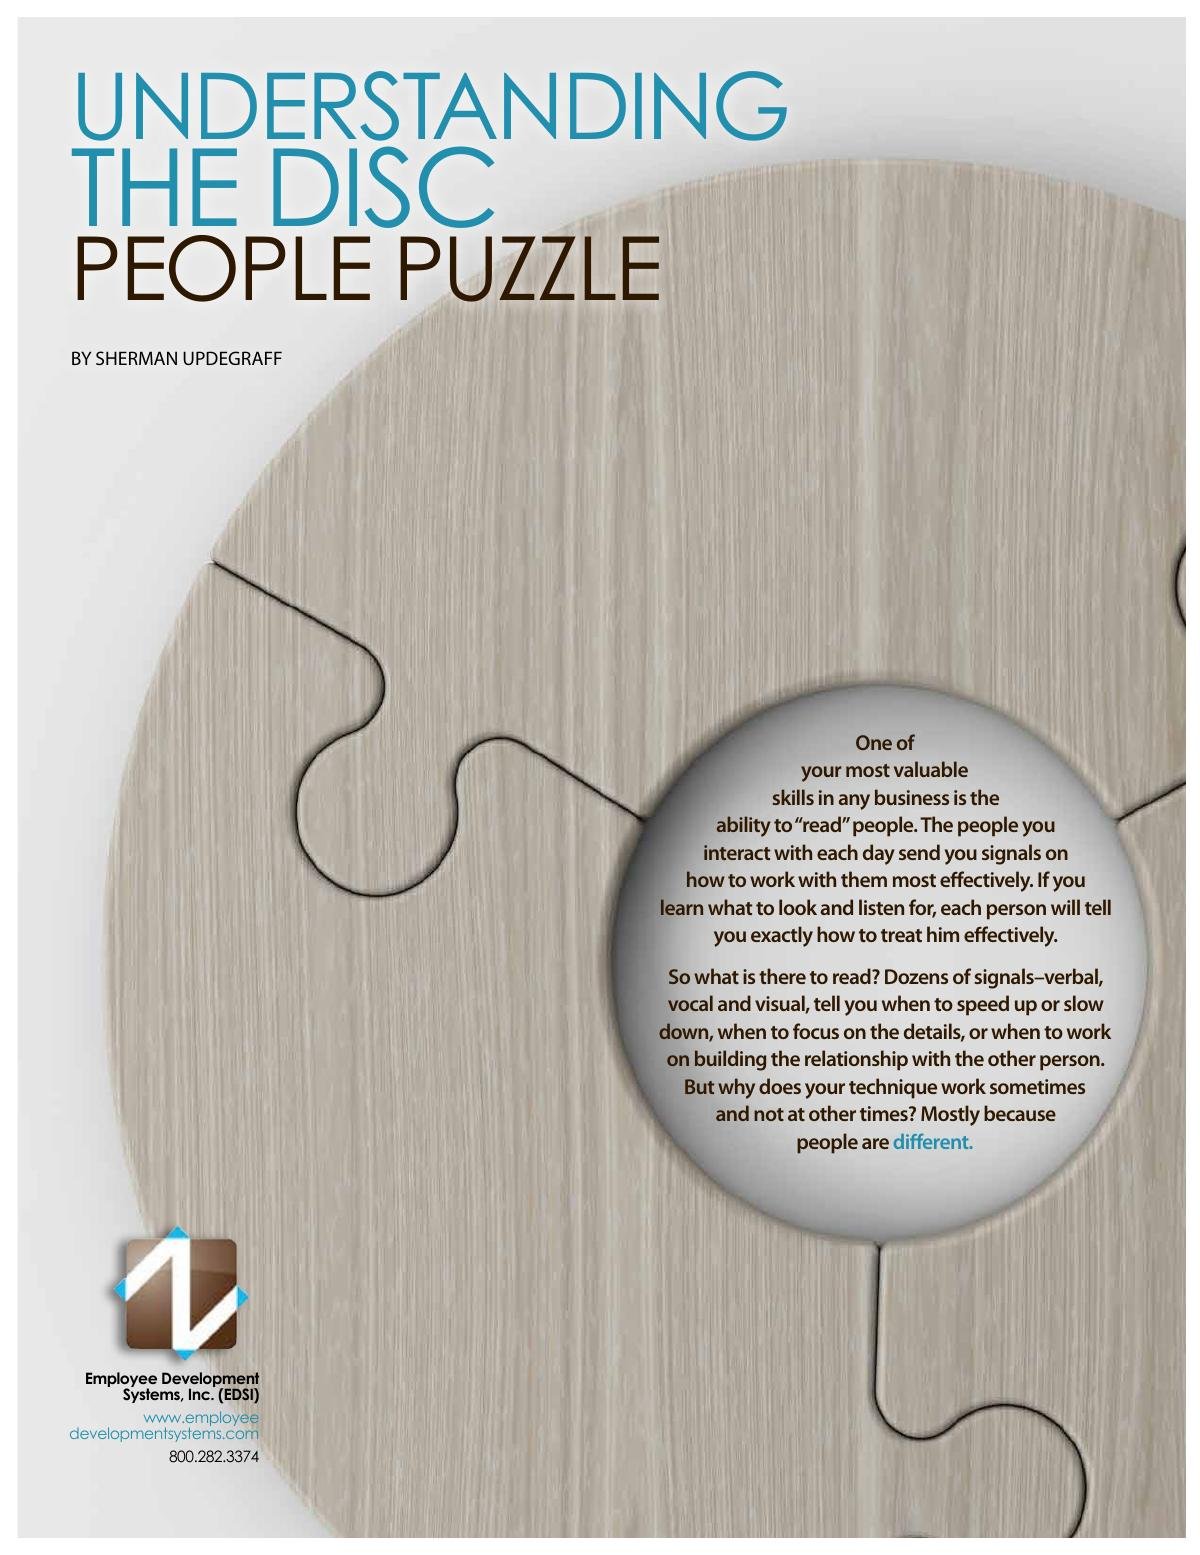 Understand the DISC People Puzzle